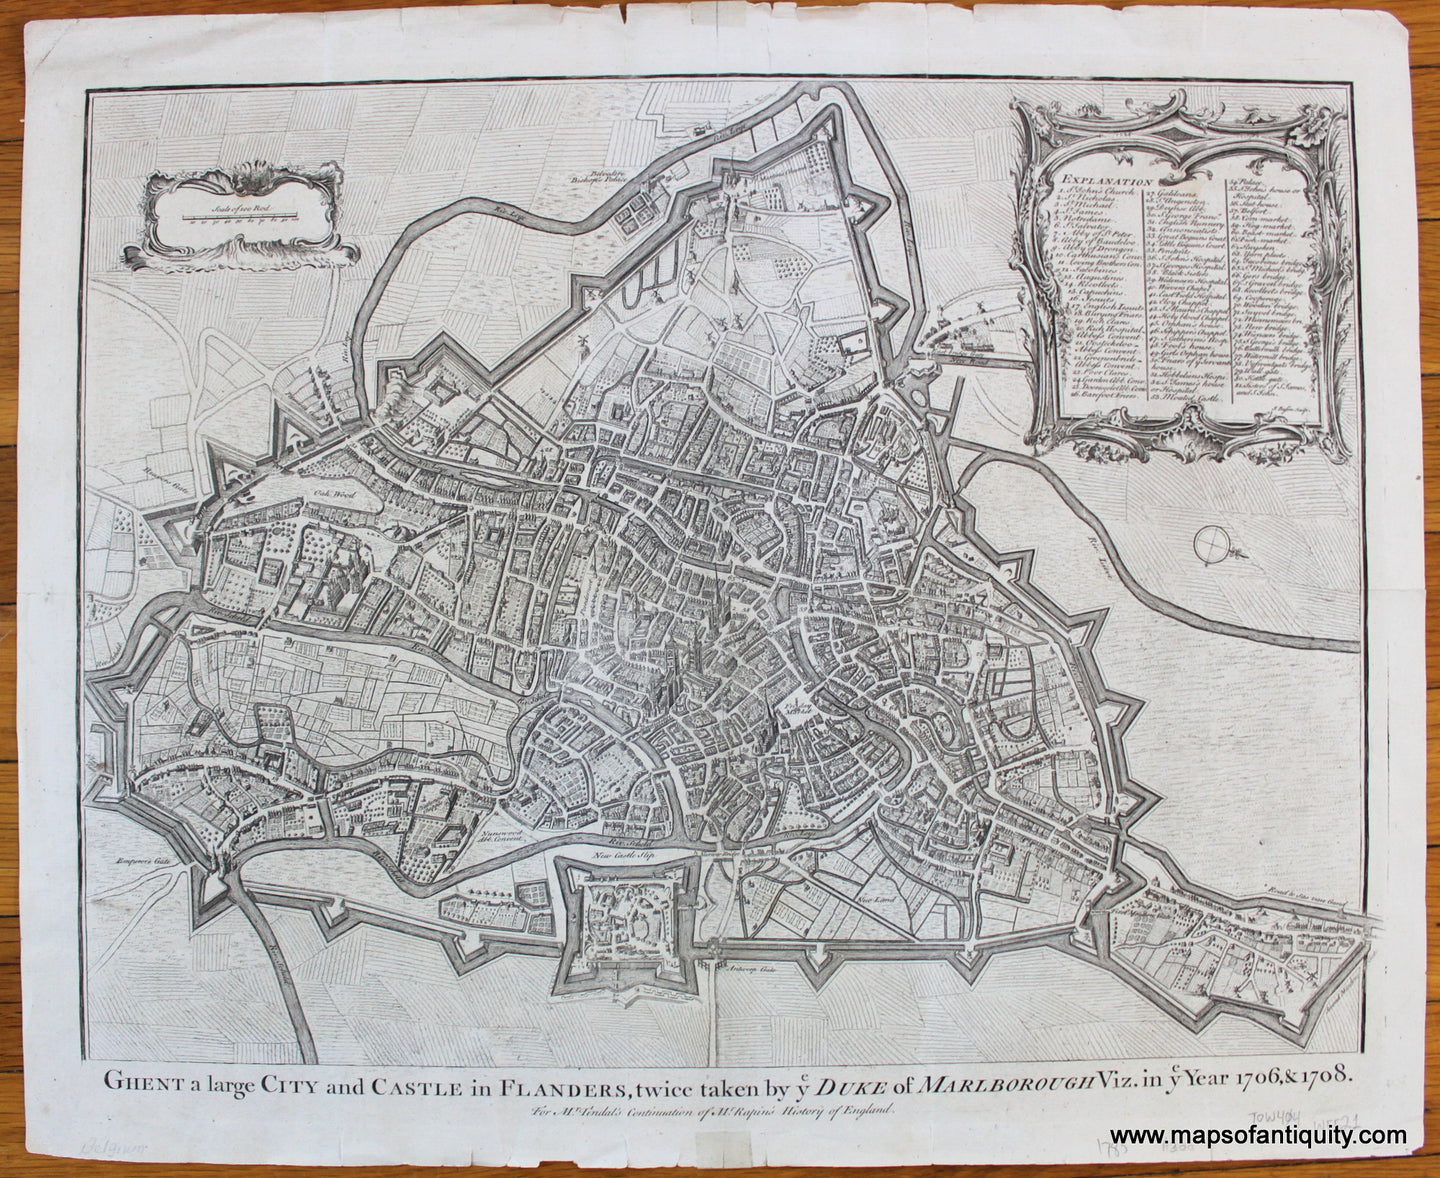 Antique-Black-and-White-Map-Ghent-A-Large-City-and-Castle-in-Flanders-Twice-Taken-by-ye-Duke-of-Marlborough-Viz.-in-ye-Year-1706-&-1708.-Early-Maps-Europe-Belgium-1785-Tindal/Rapin-Maps-Of-Antiquity